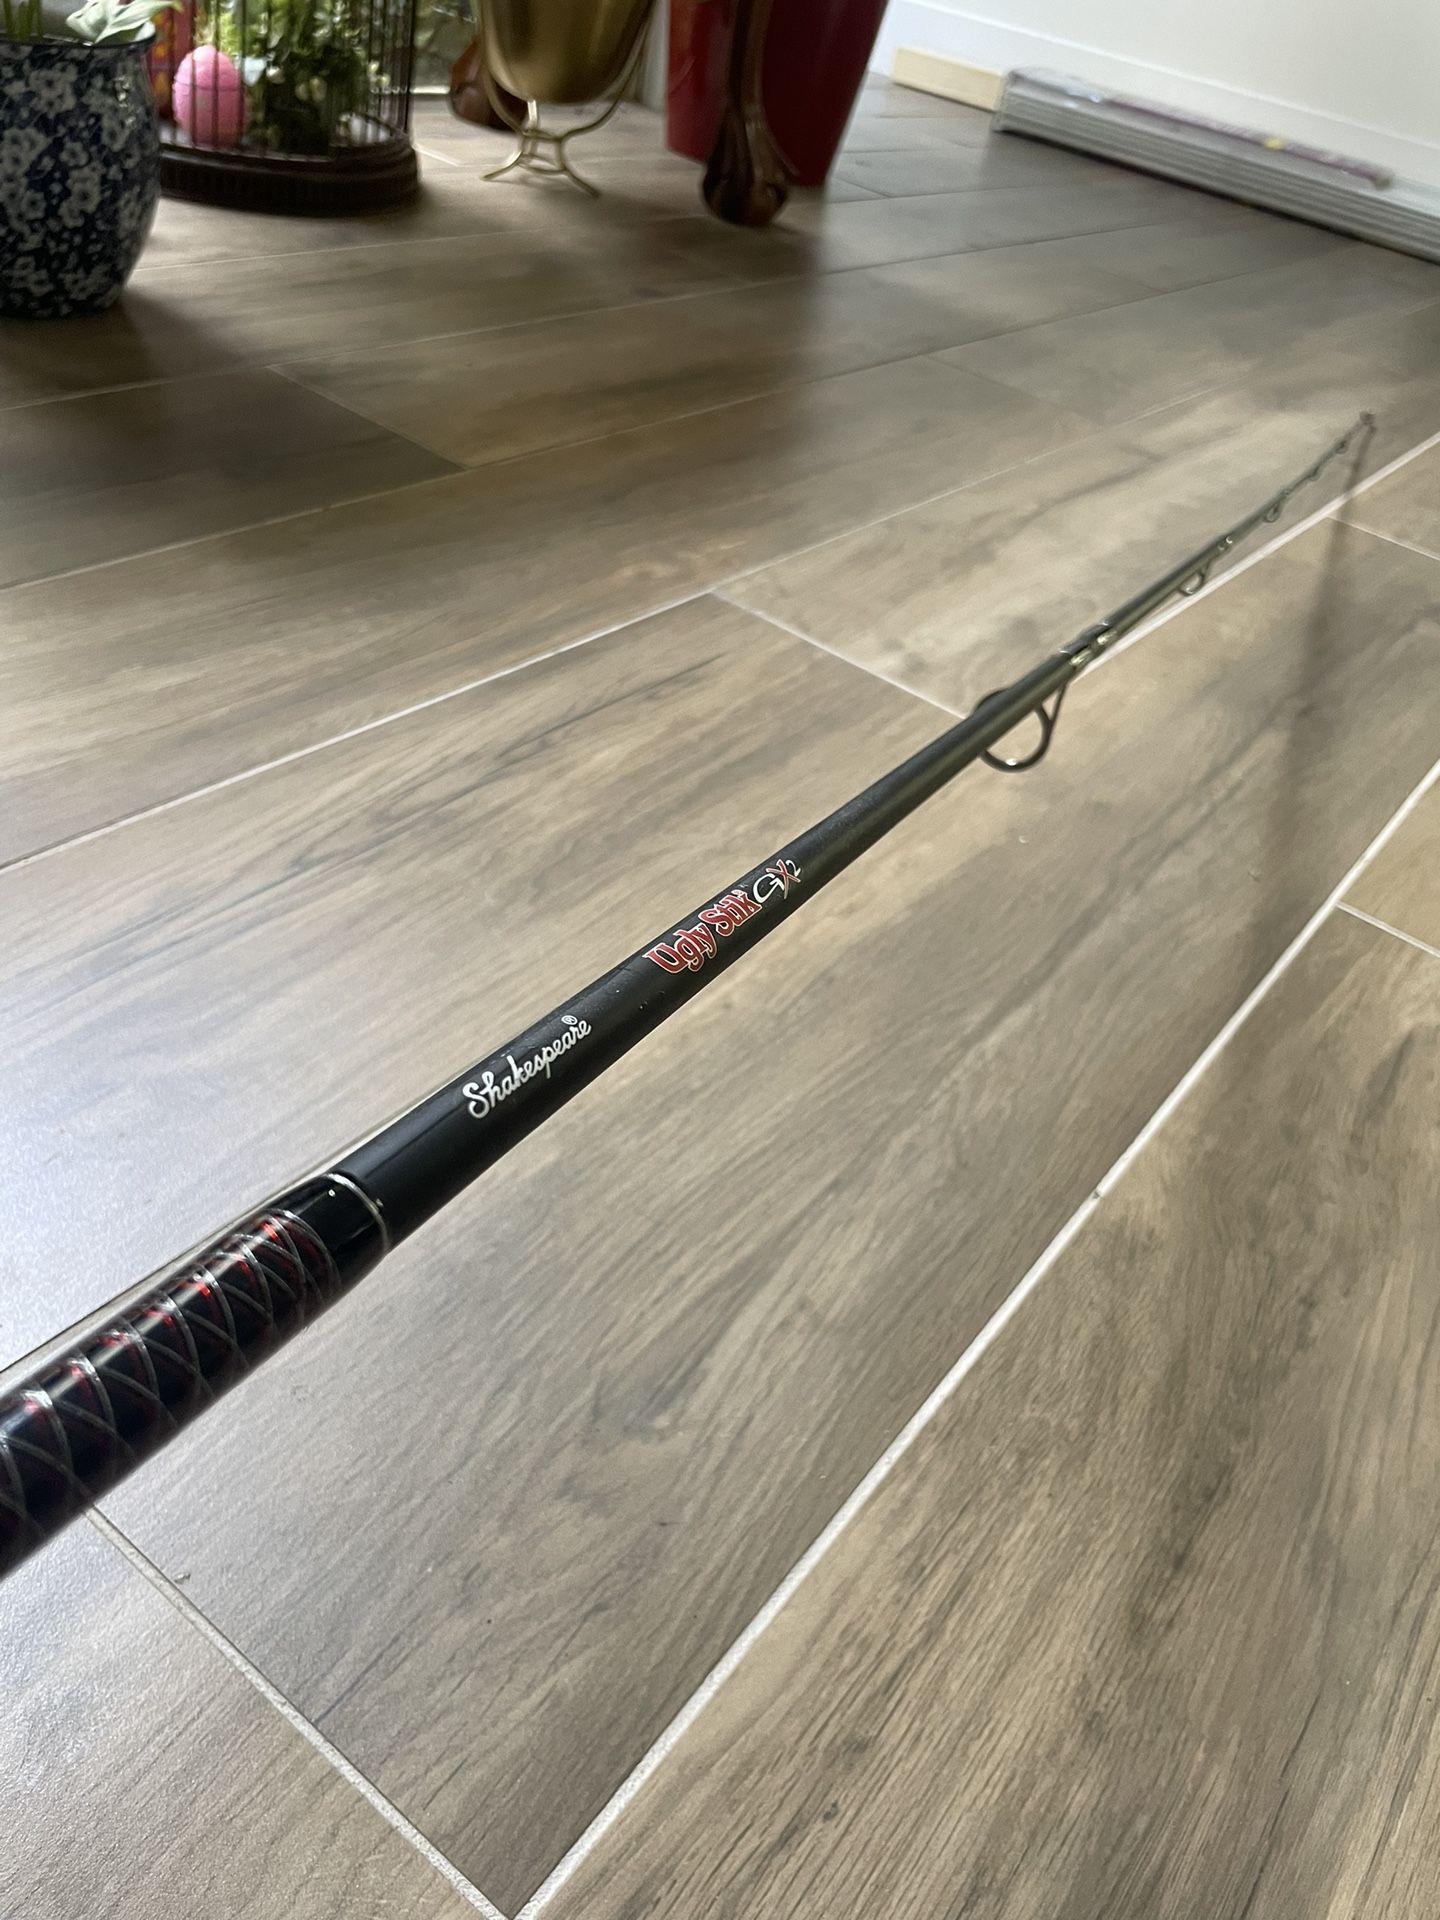 Fishing Rod with Spinning Reel